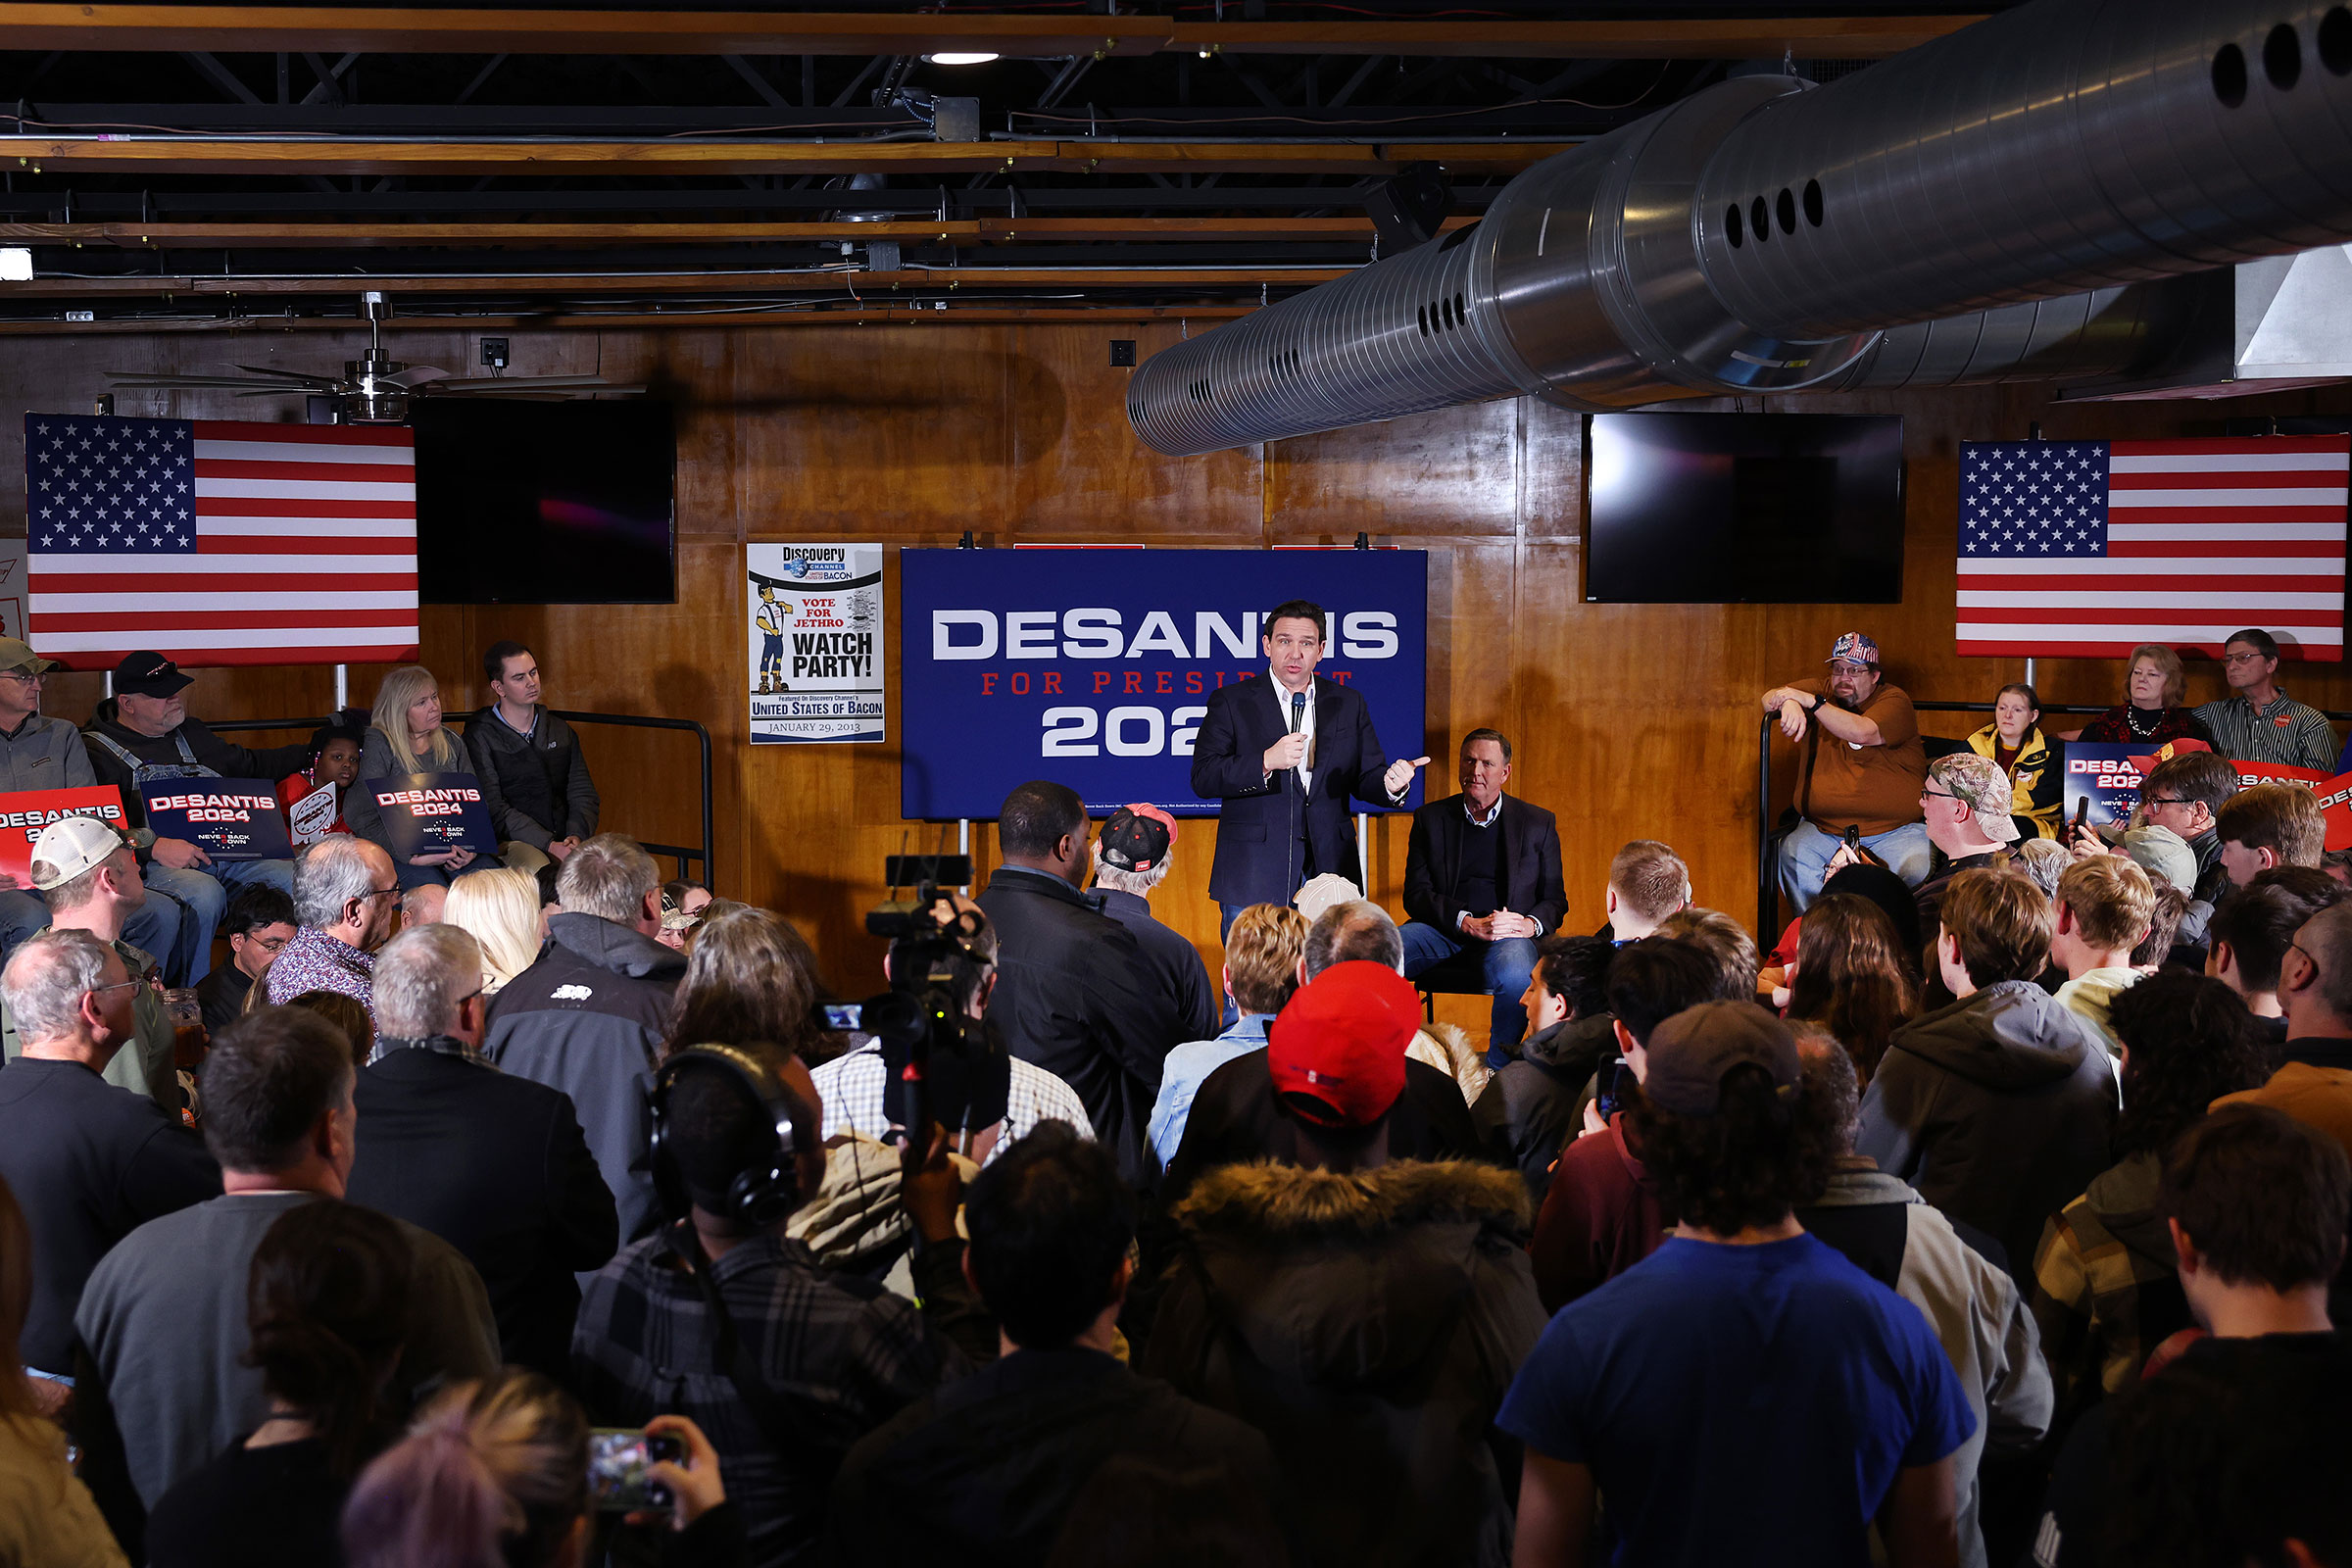 Florida Gov. Ron DeSantis speaks at a campaign event at Jethro's BBQ on January 11, in Ames, Iowa.